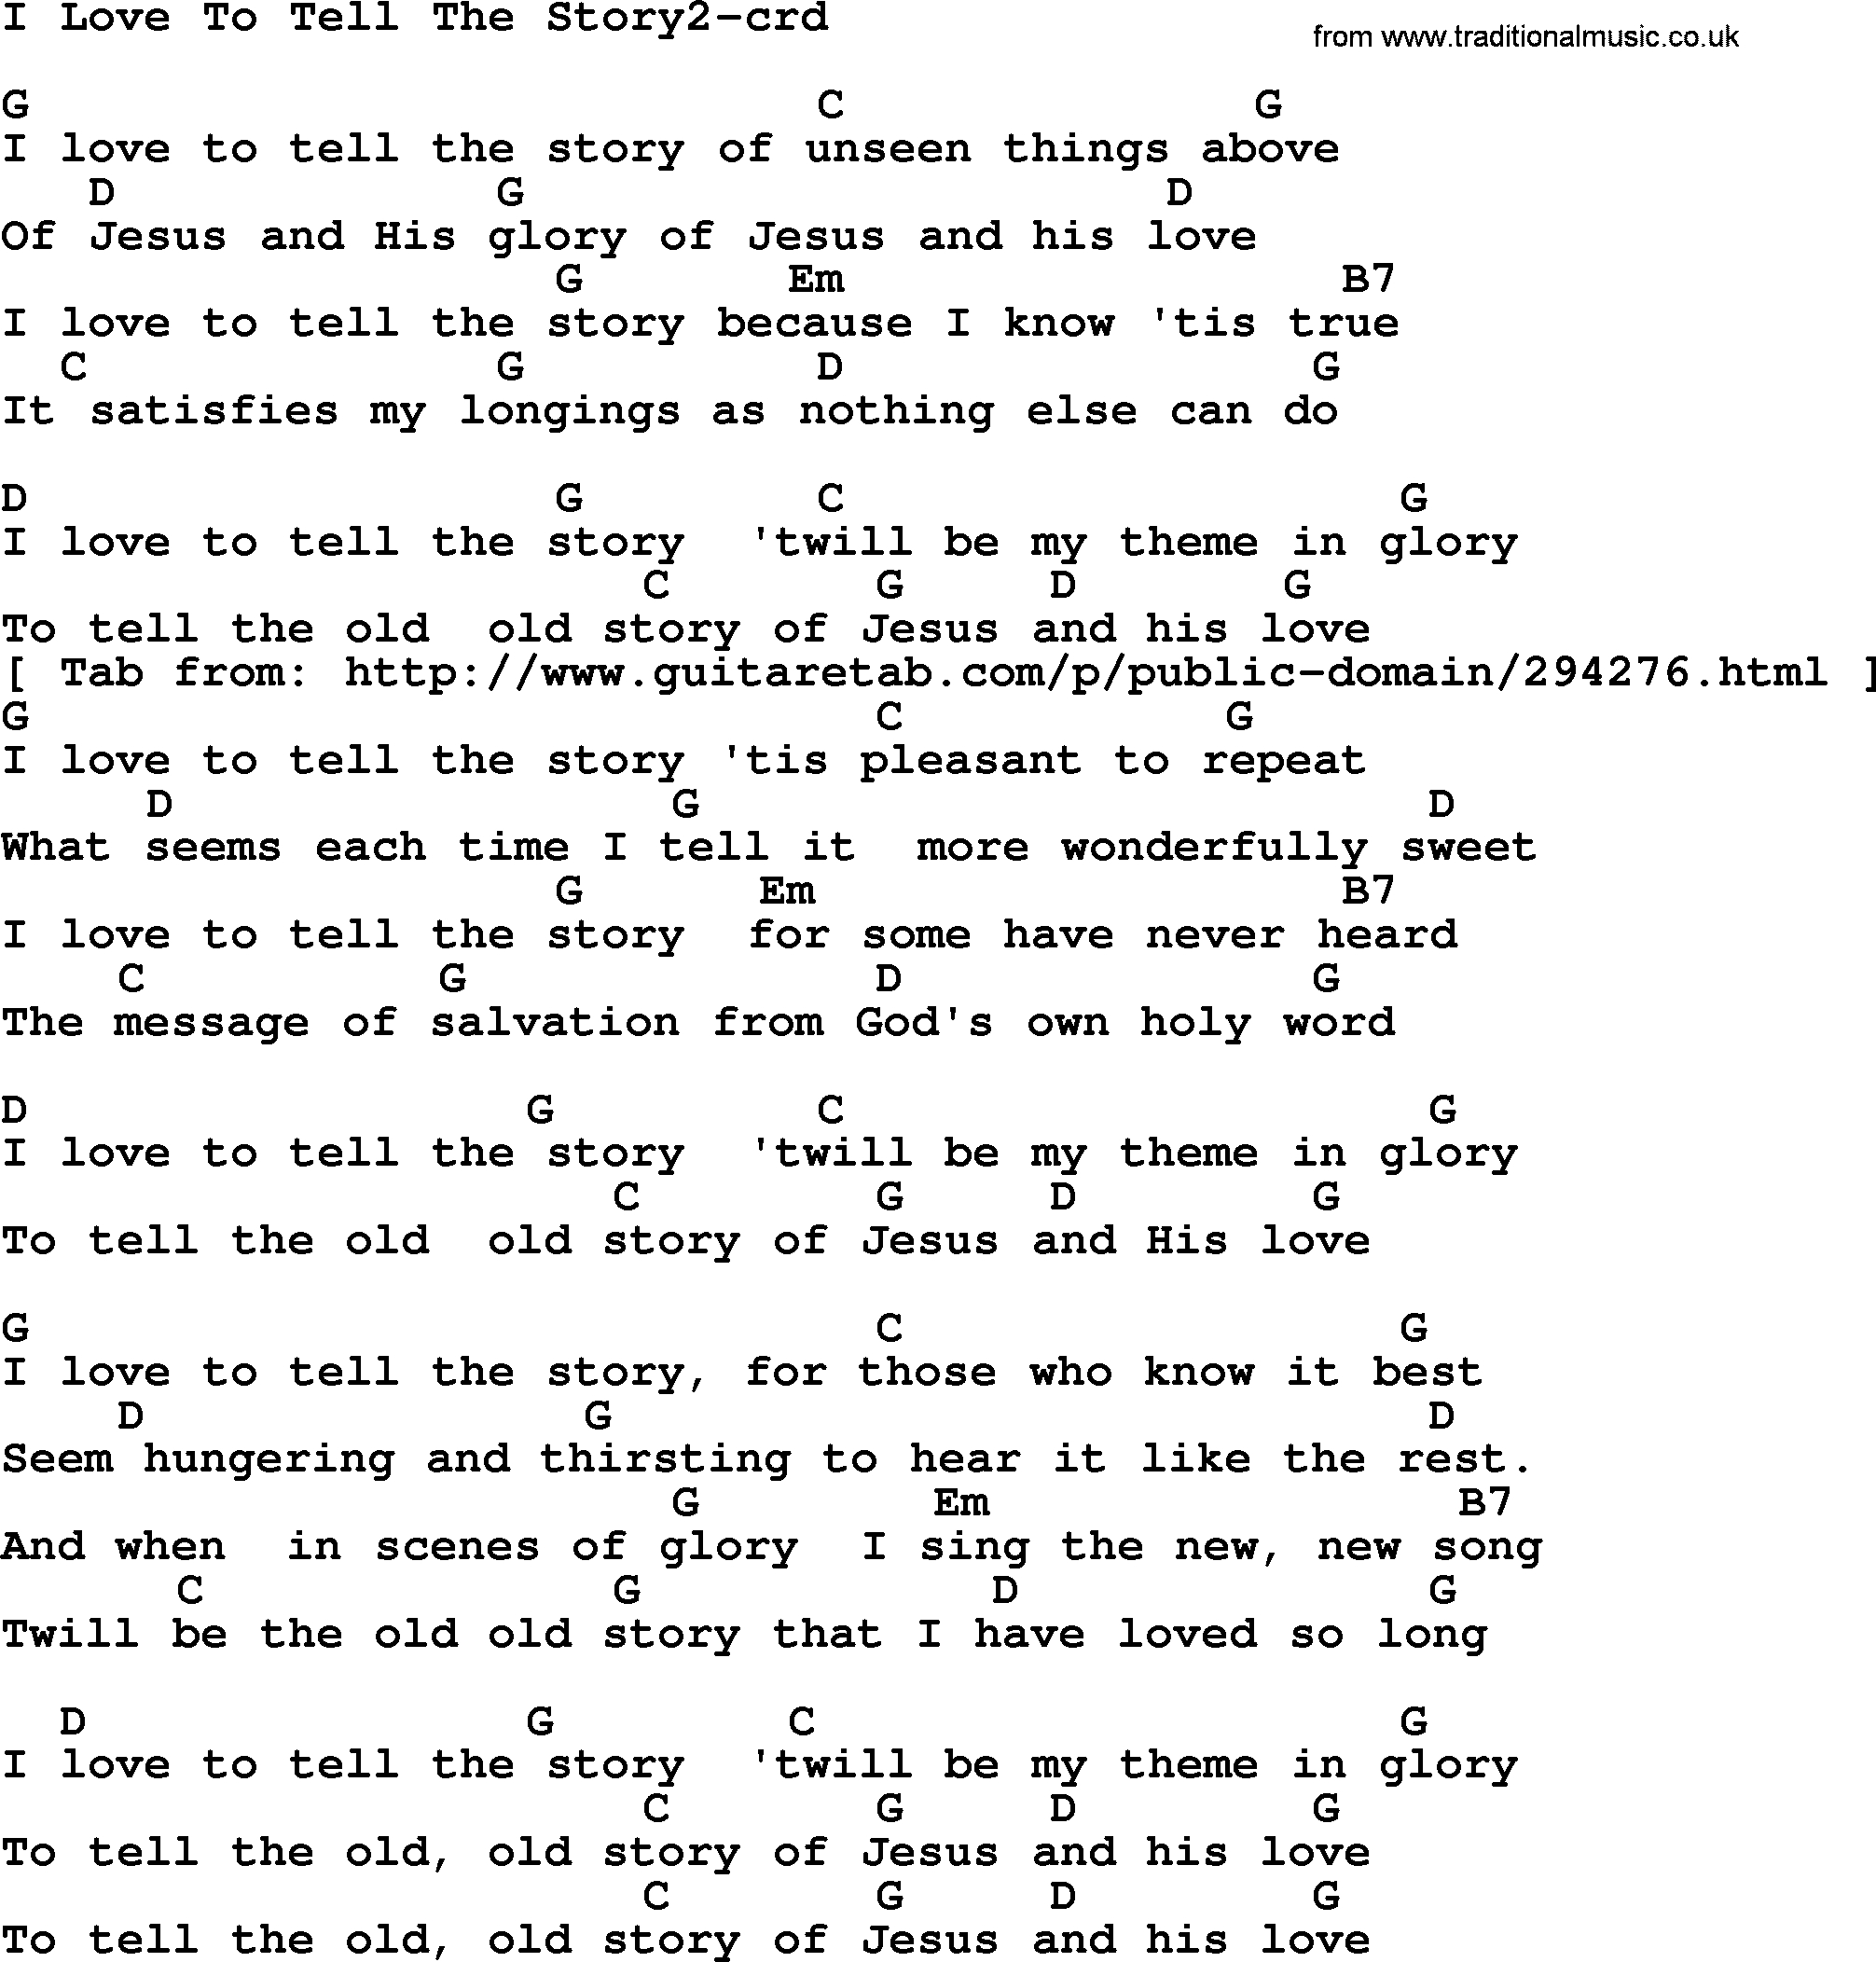 Love Story Chords Top 500 Hymn I Love To Tell The Story2 Lyrics Chords And Pdf